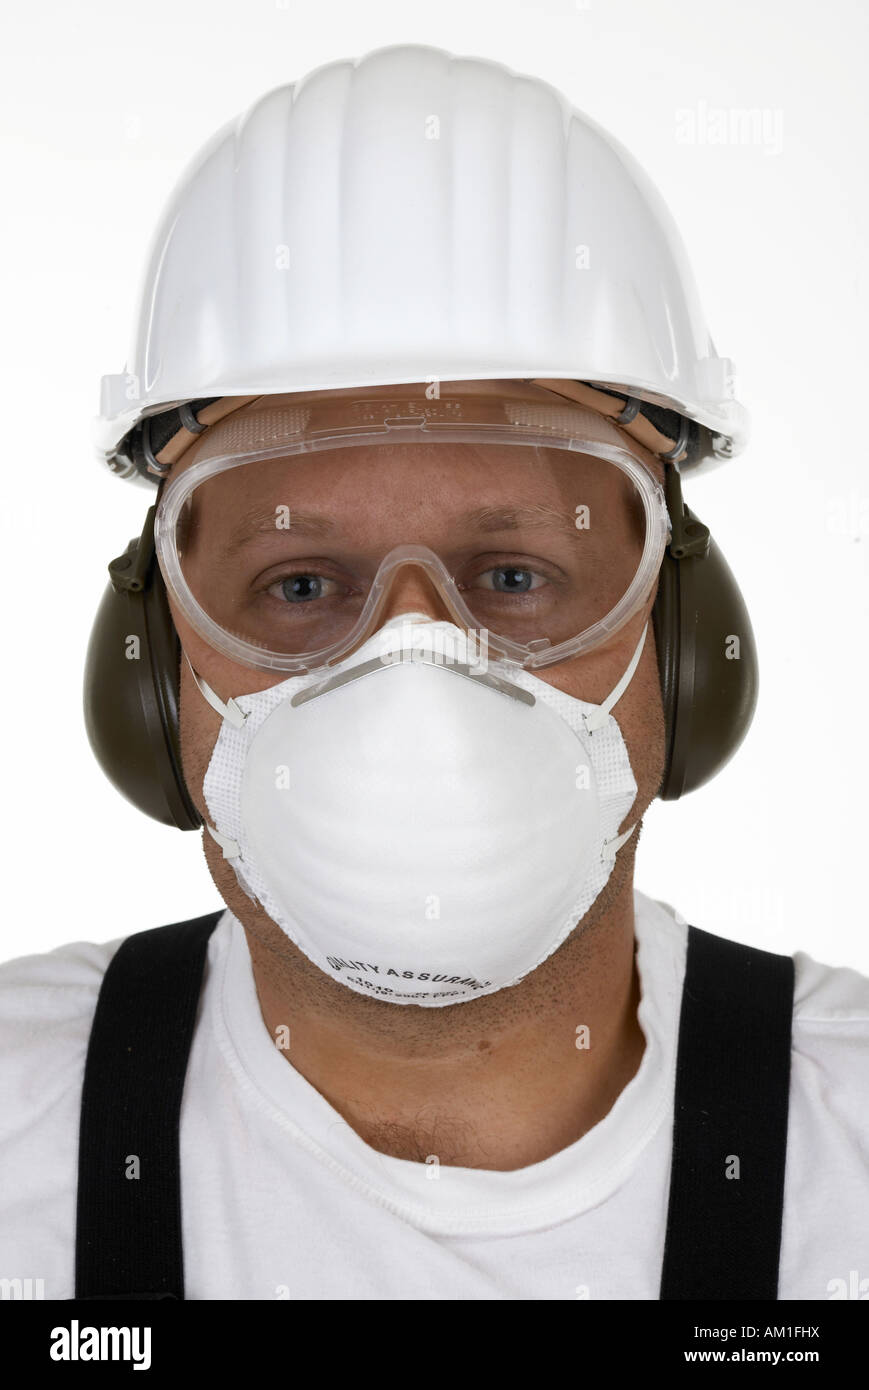 Craftsman with protective goggles, face mask, ear protection and helmet Stock Photo